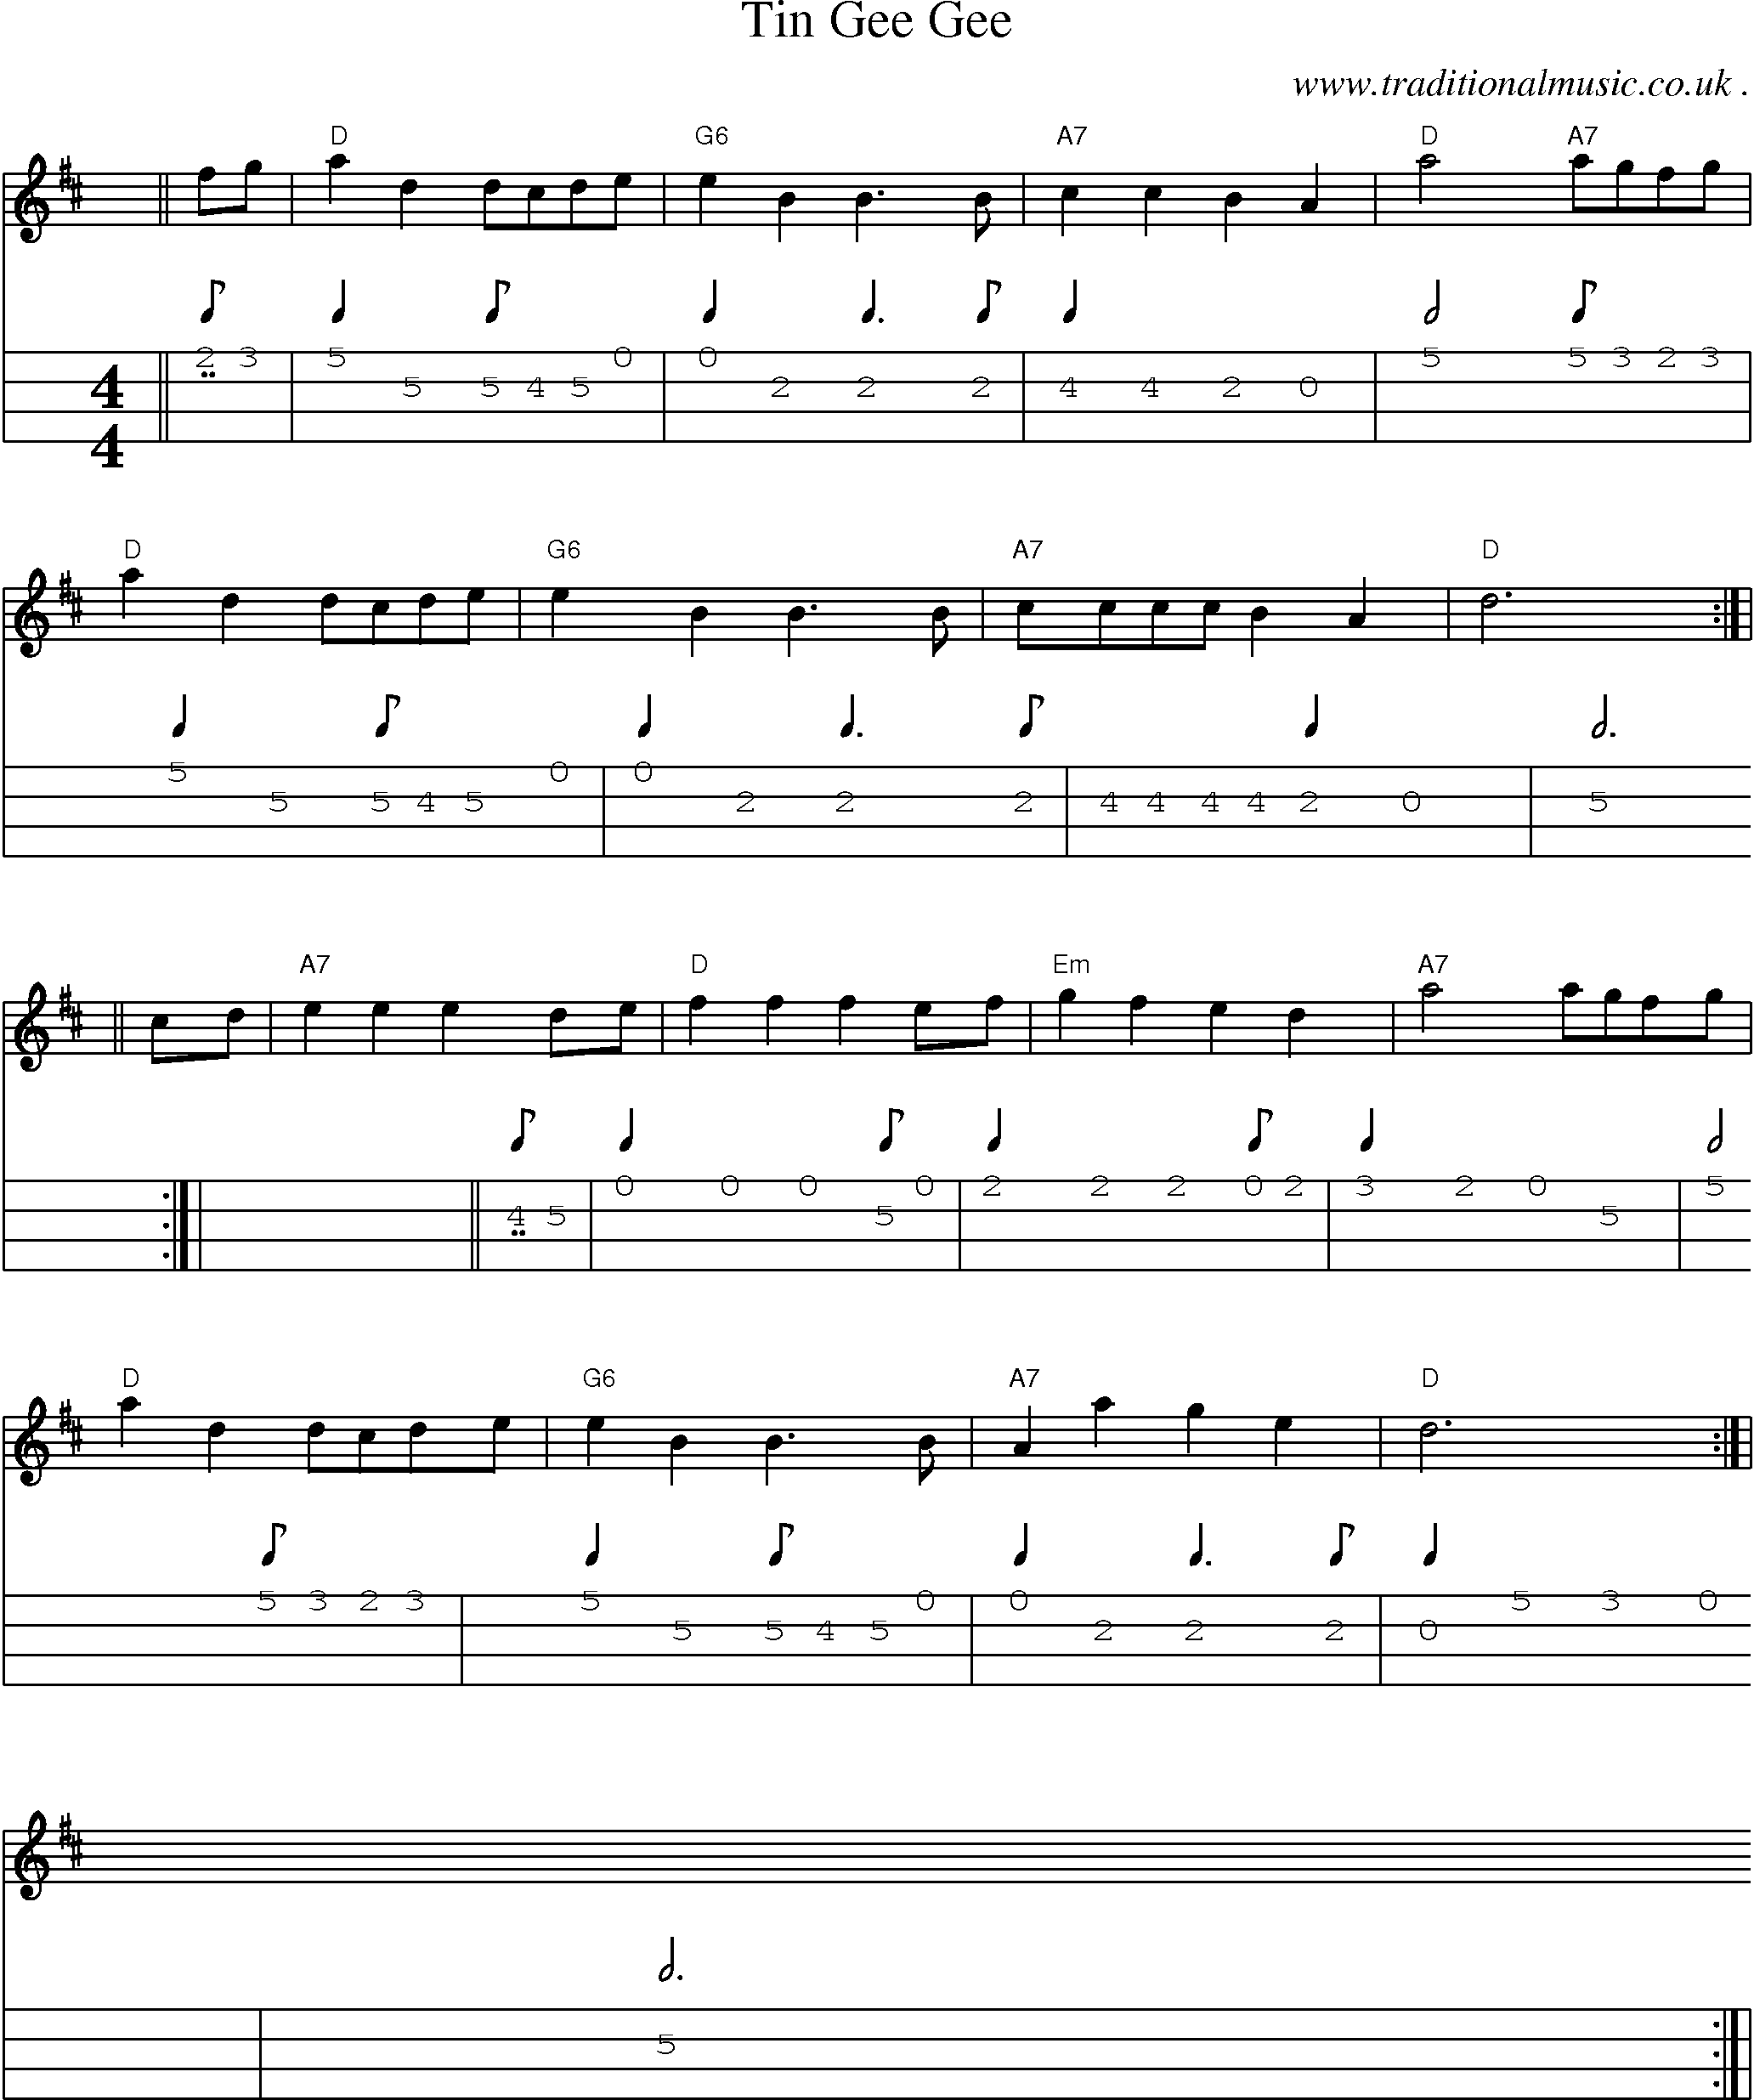 Sheet-music  score, Chords and Mandolin Tabs for Tin Gee Gee